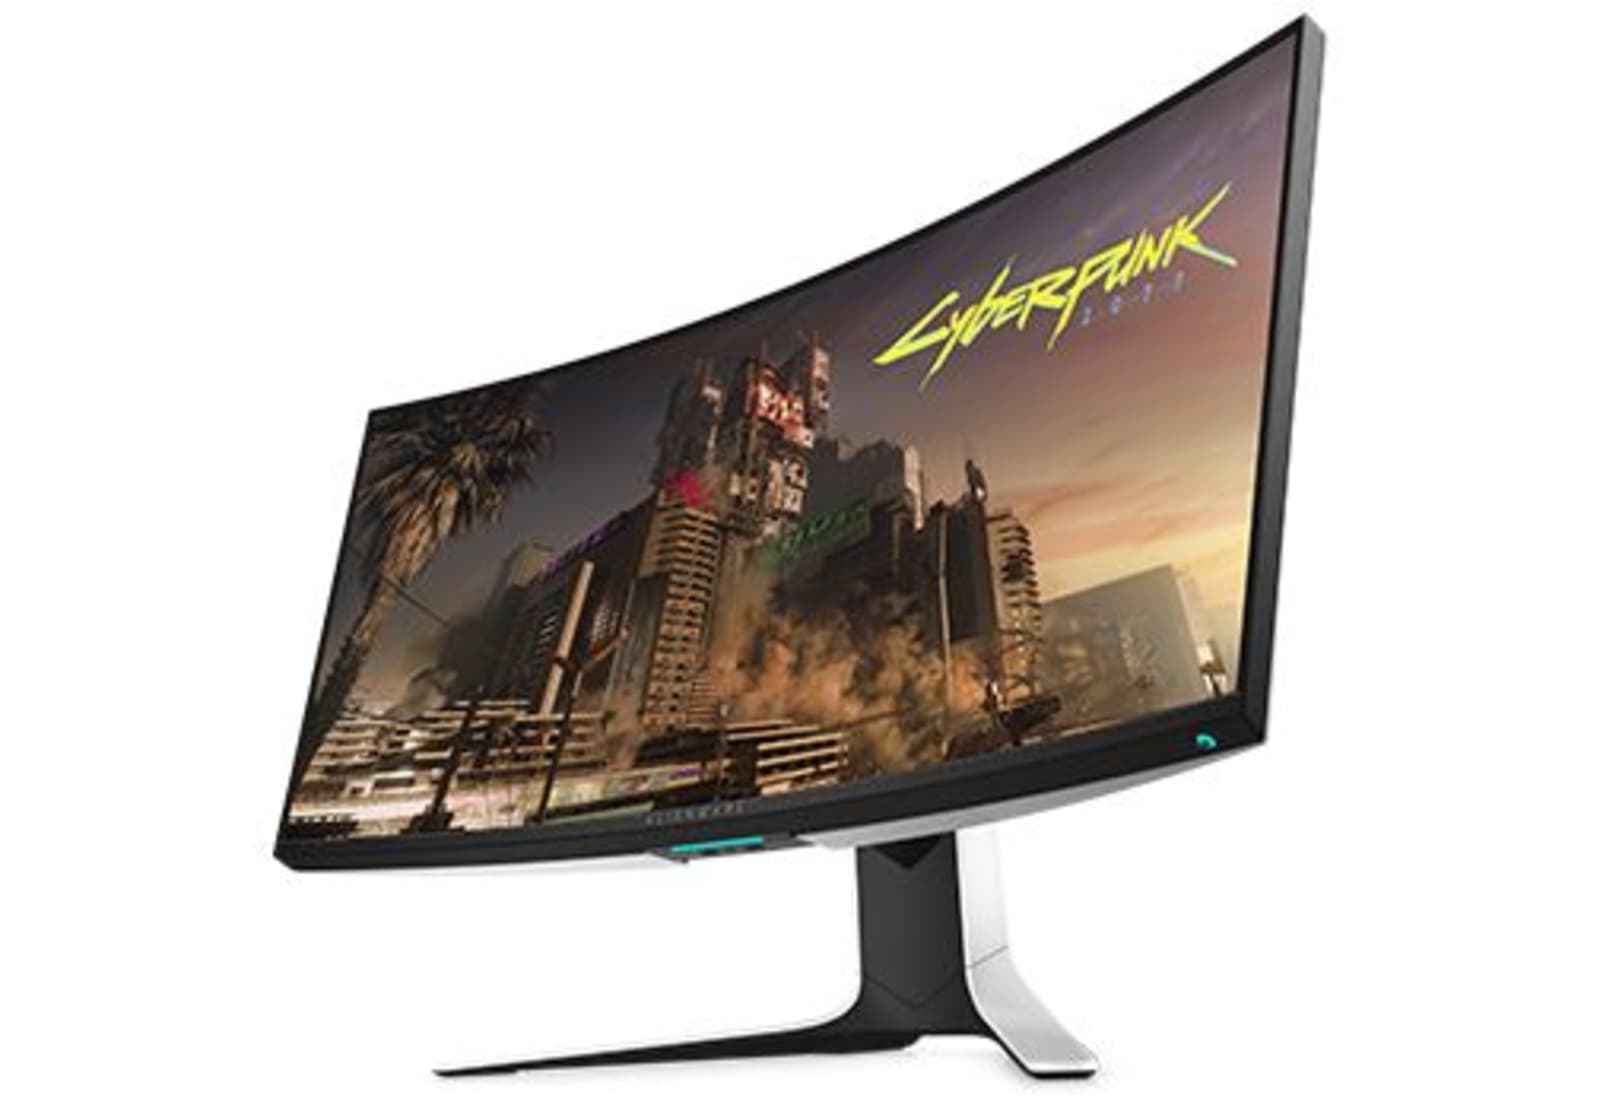 Alienware 34-inch Curved Ultrawide Monitor